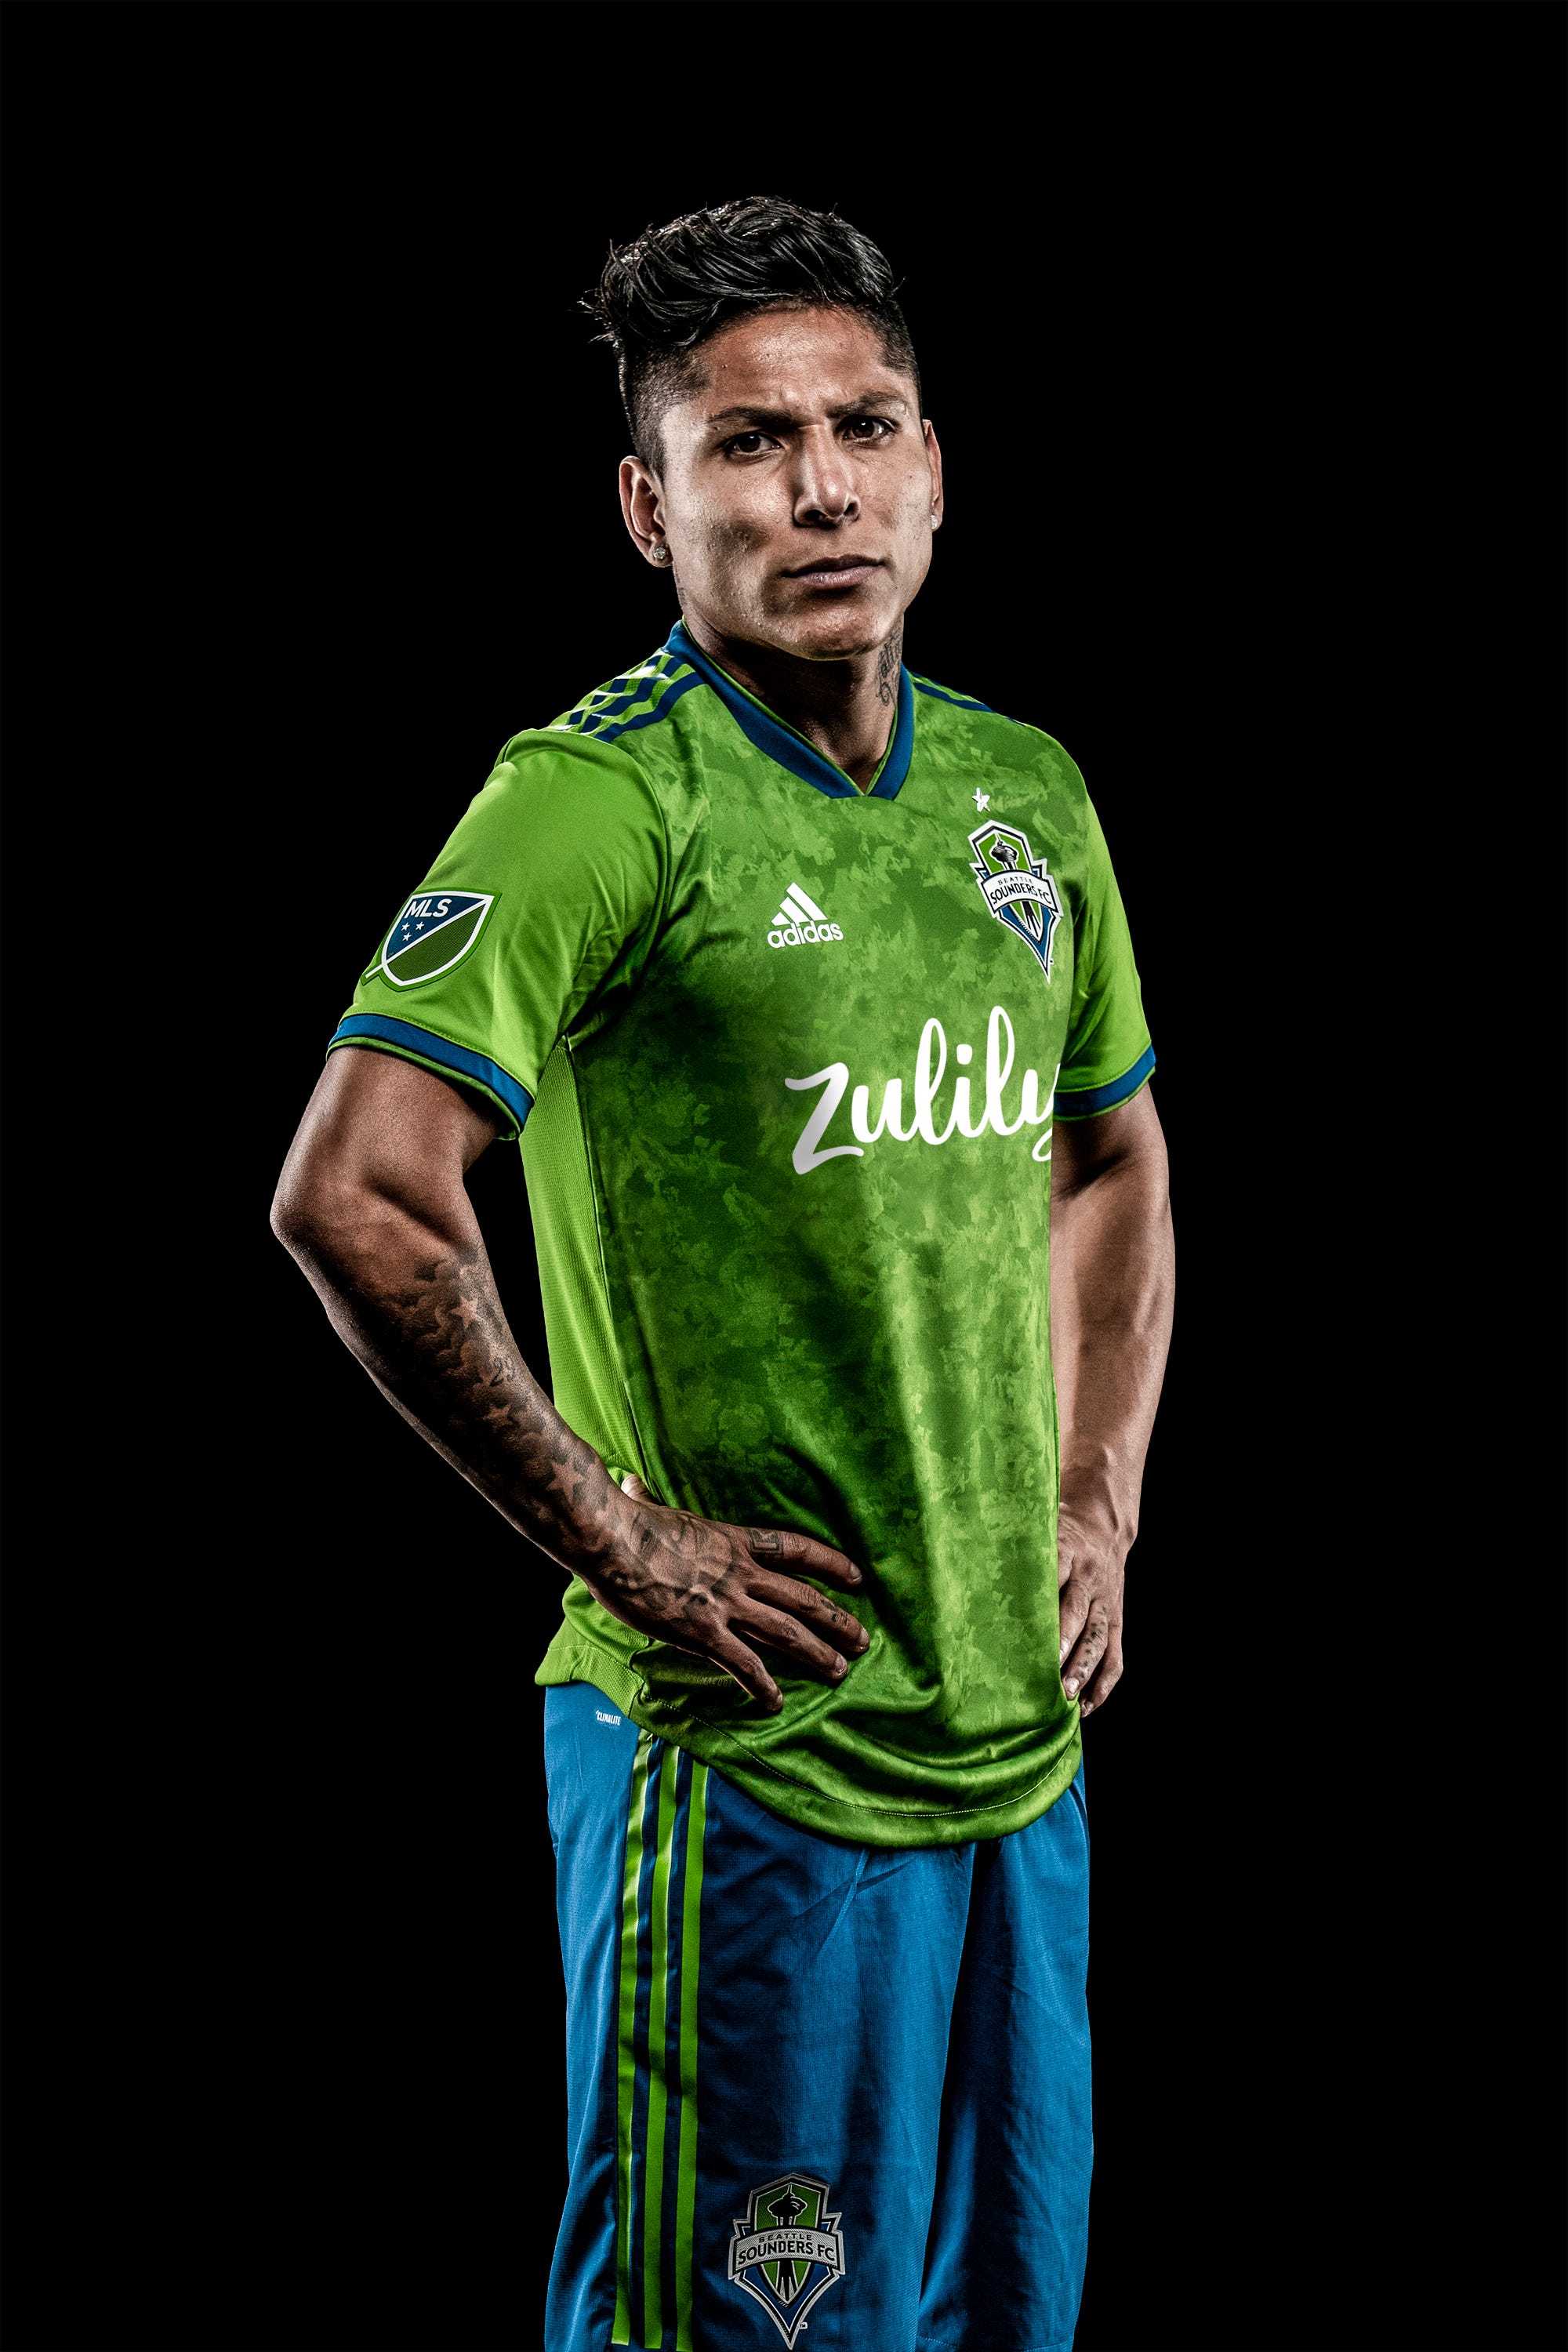 seattle sounders xbox jersey